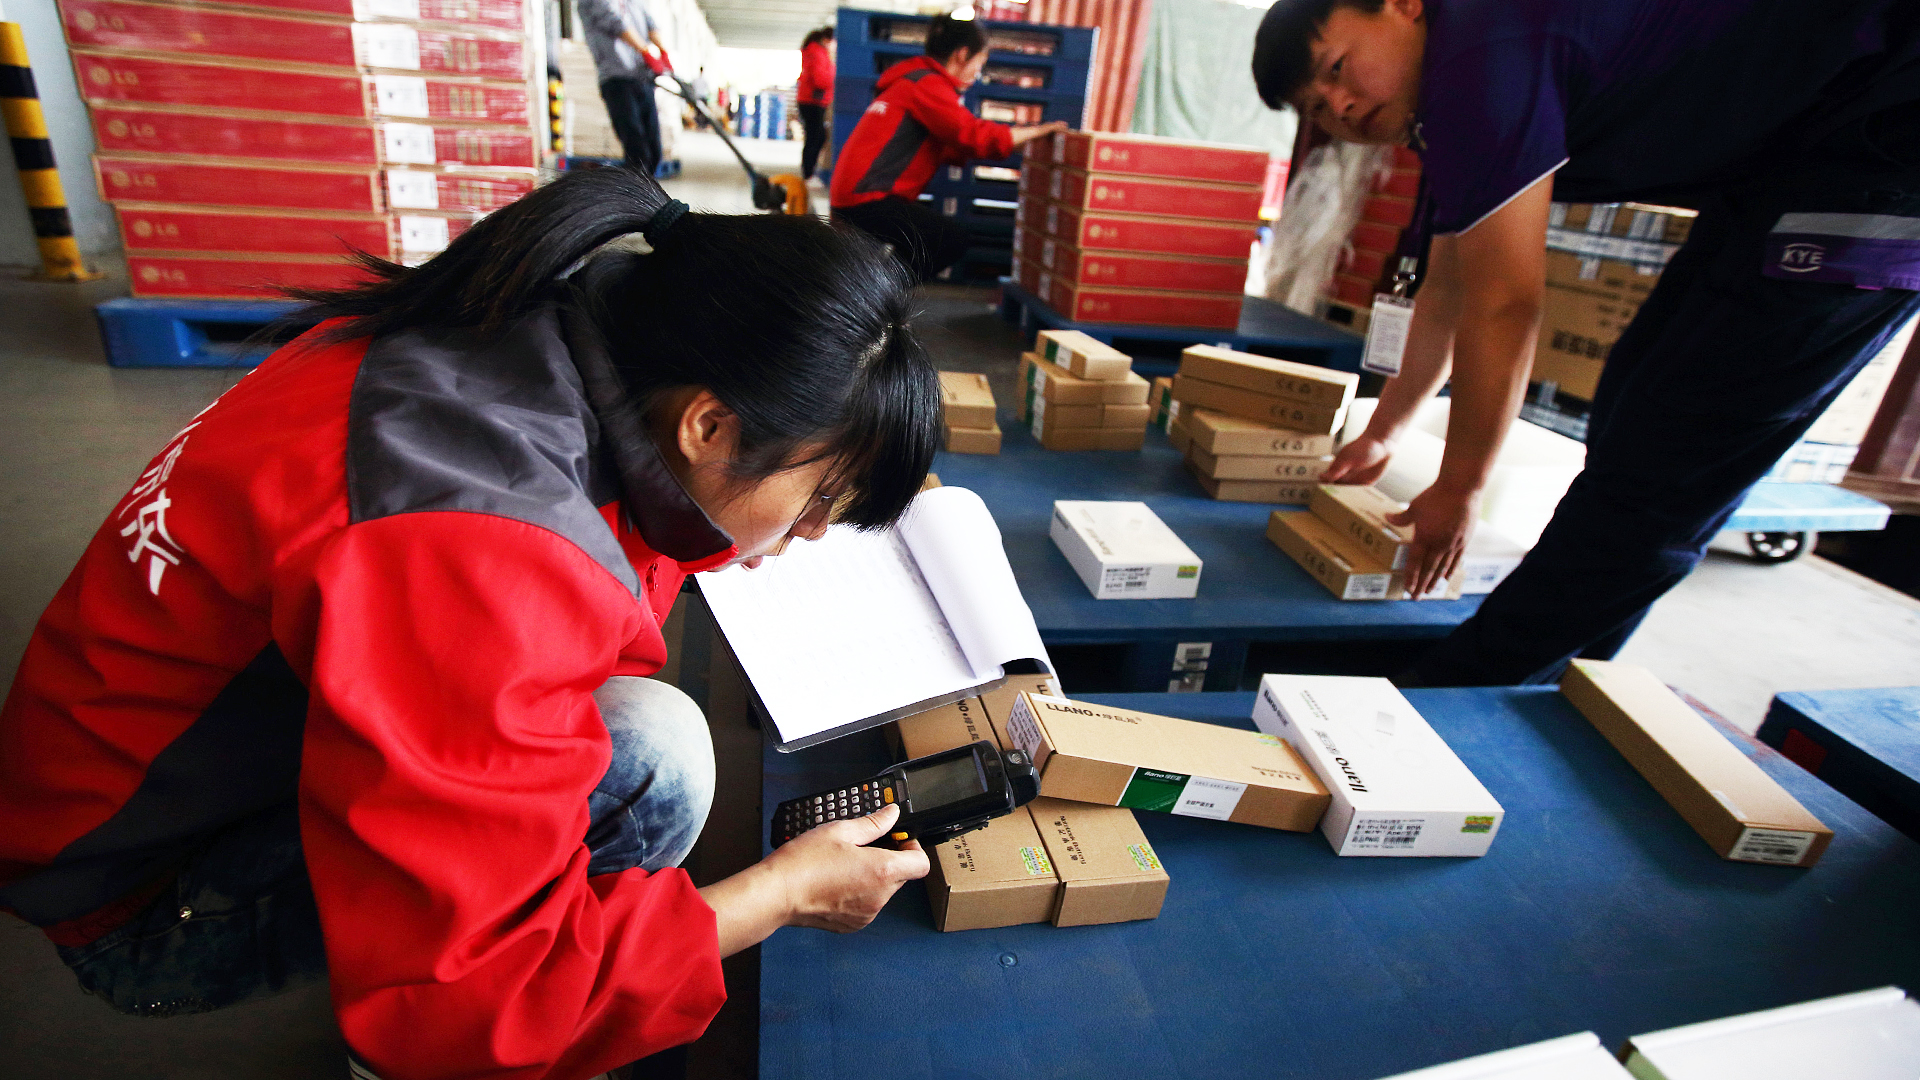 Workers check packages at a JD.com warehouse in Shanghai. Innovative companies, such as e-commerce firms, are key job sources for new university graduates. Photo: Bloomberg  